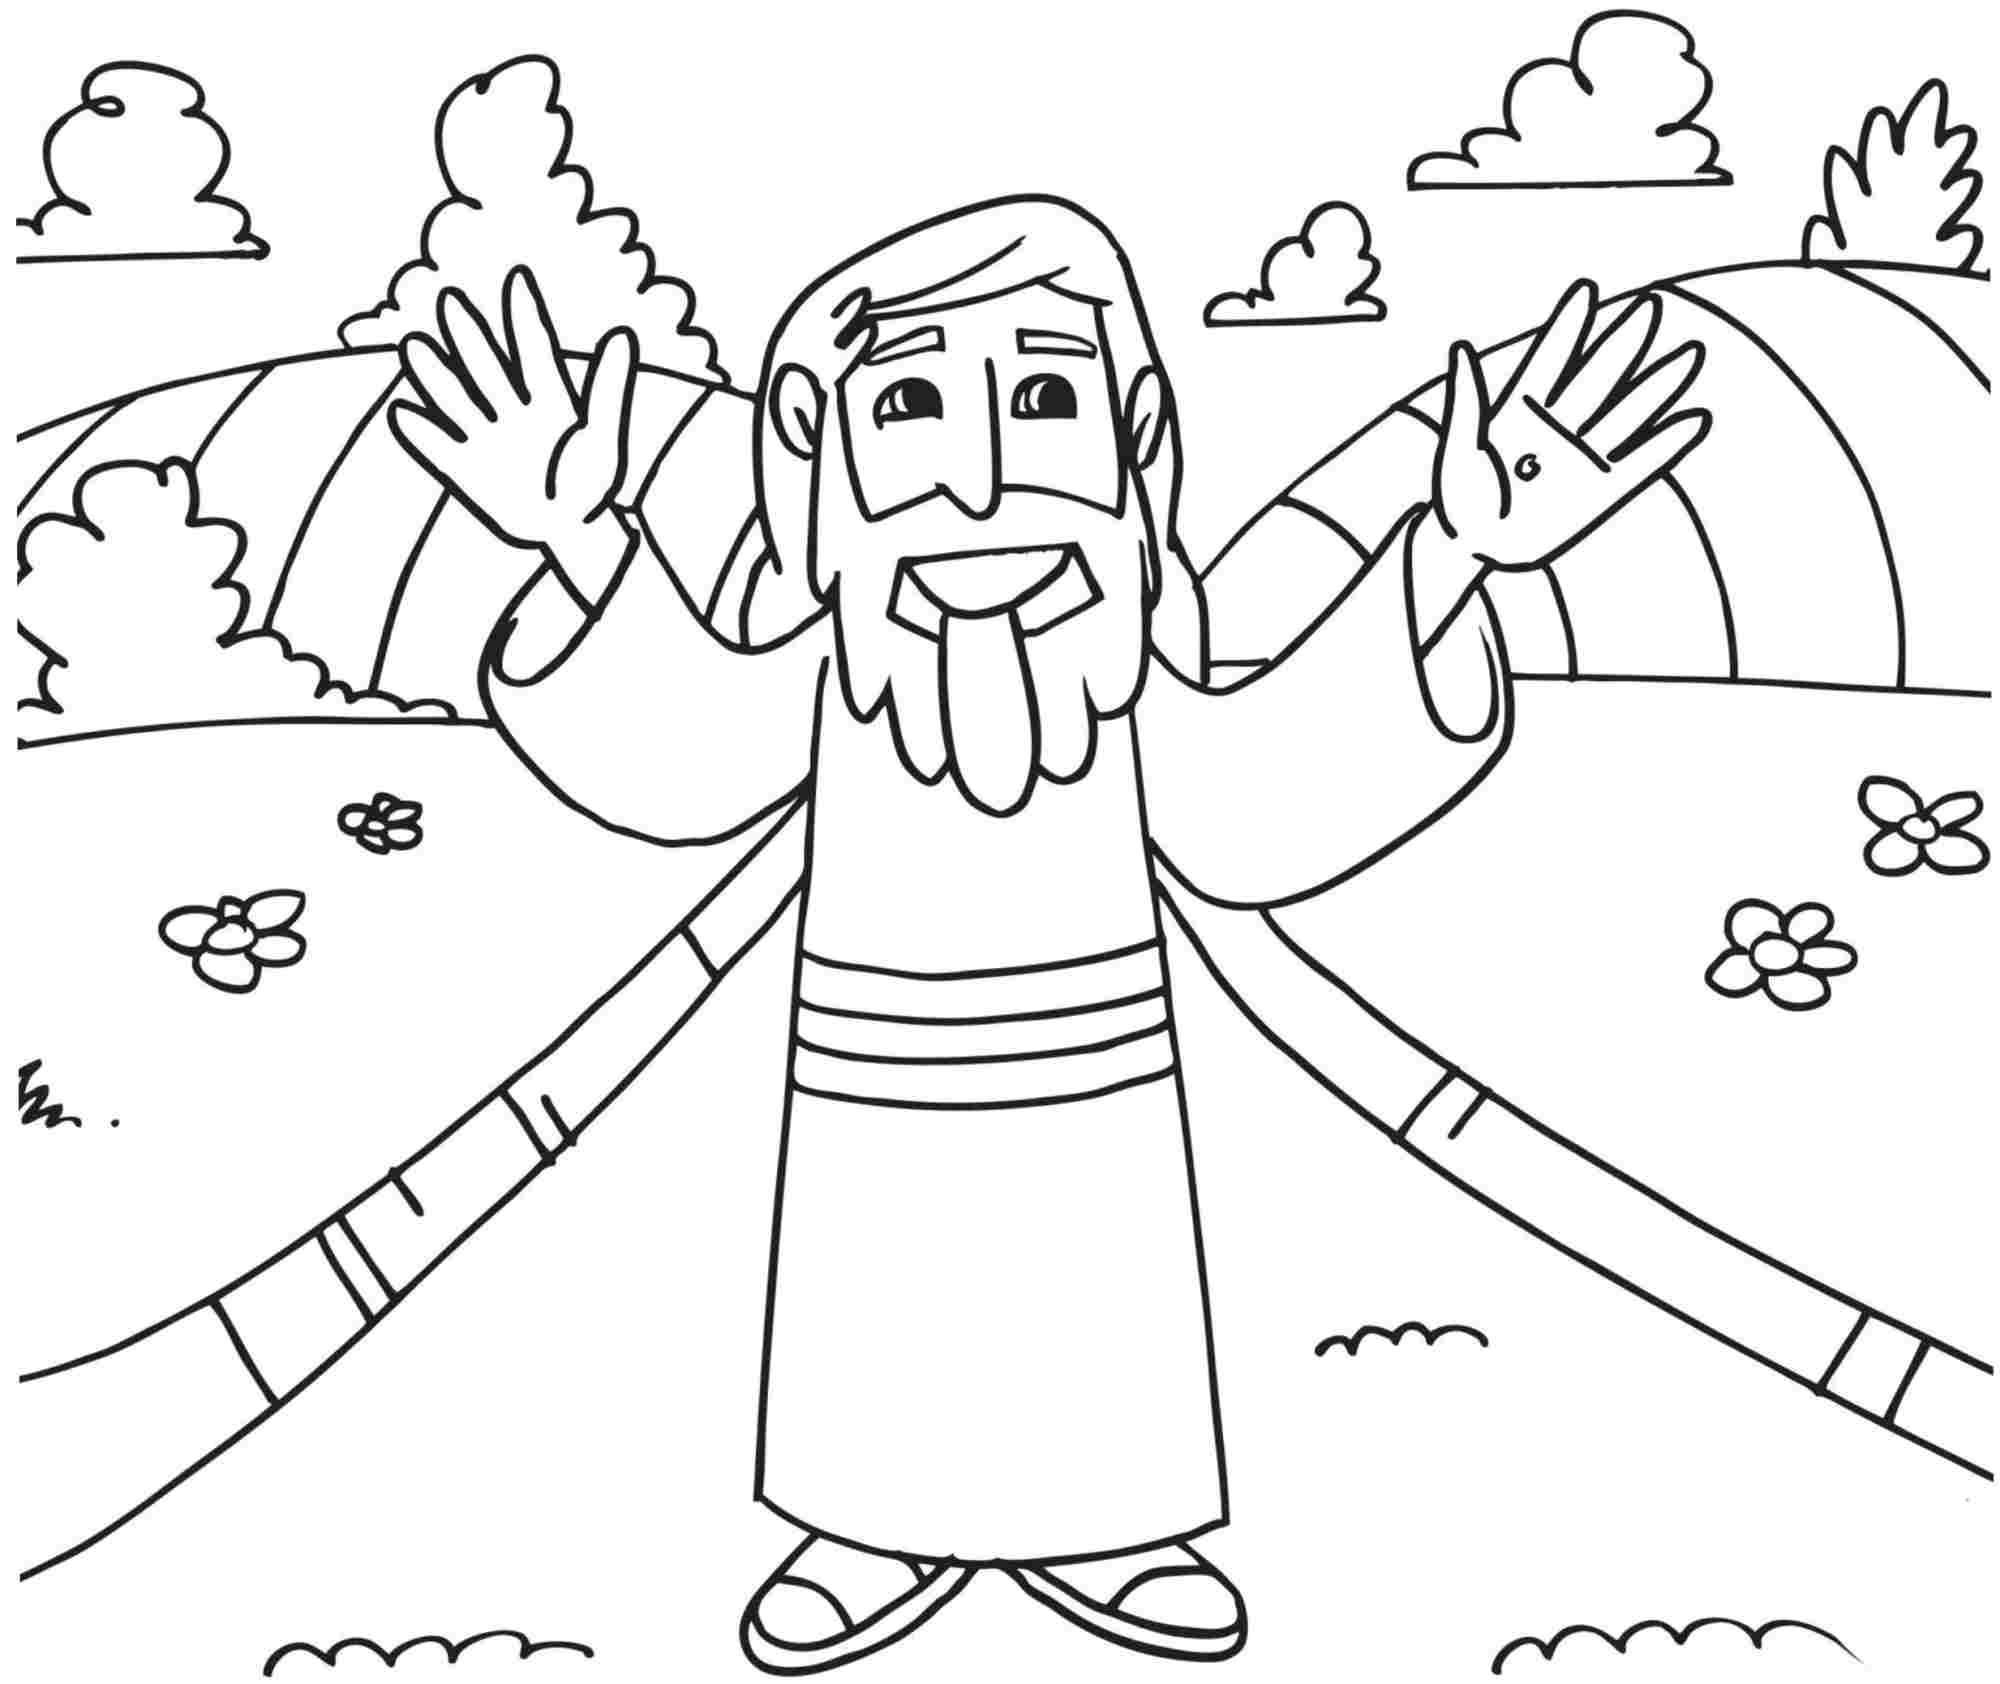 27+ Marvelous Picture of Easter Coloring Pages Religious